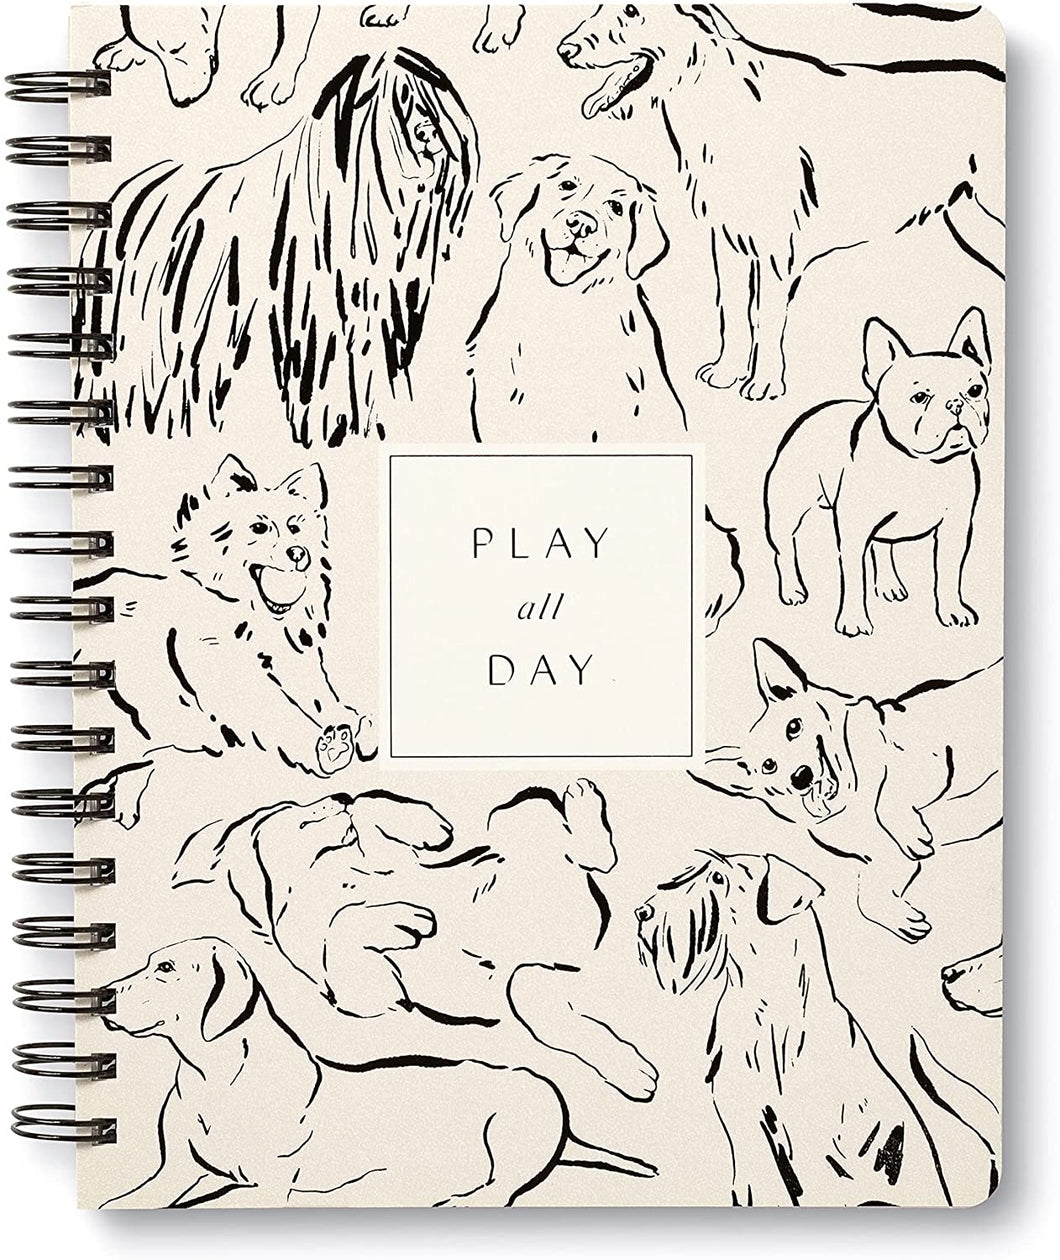 Spiral Notebook - Play All Day